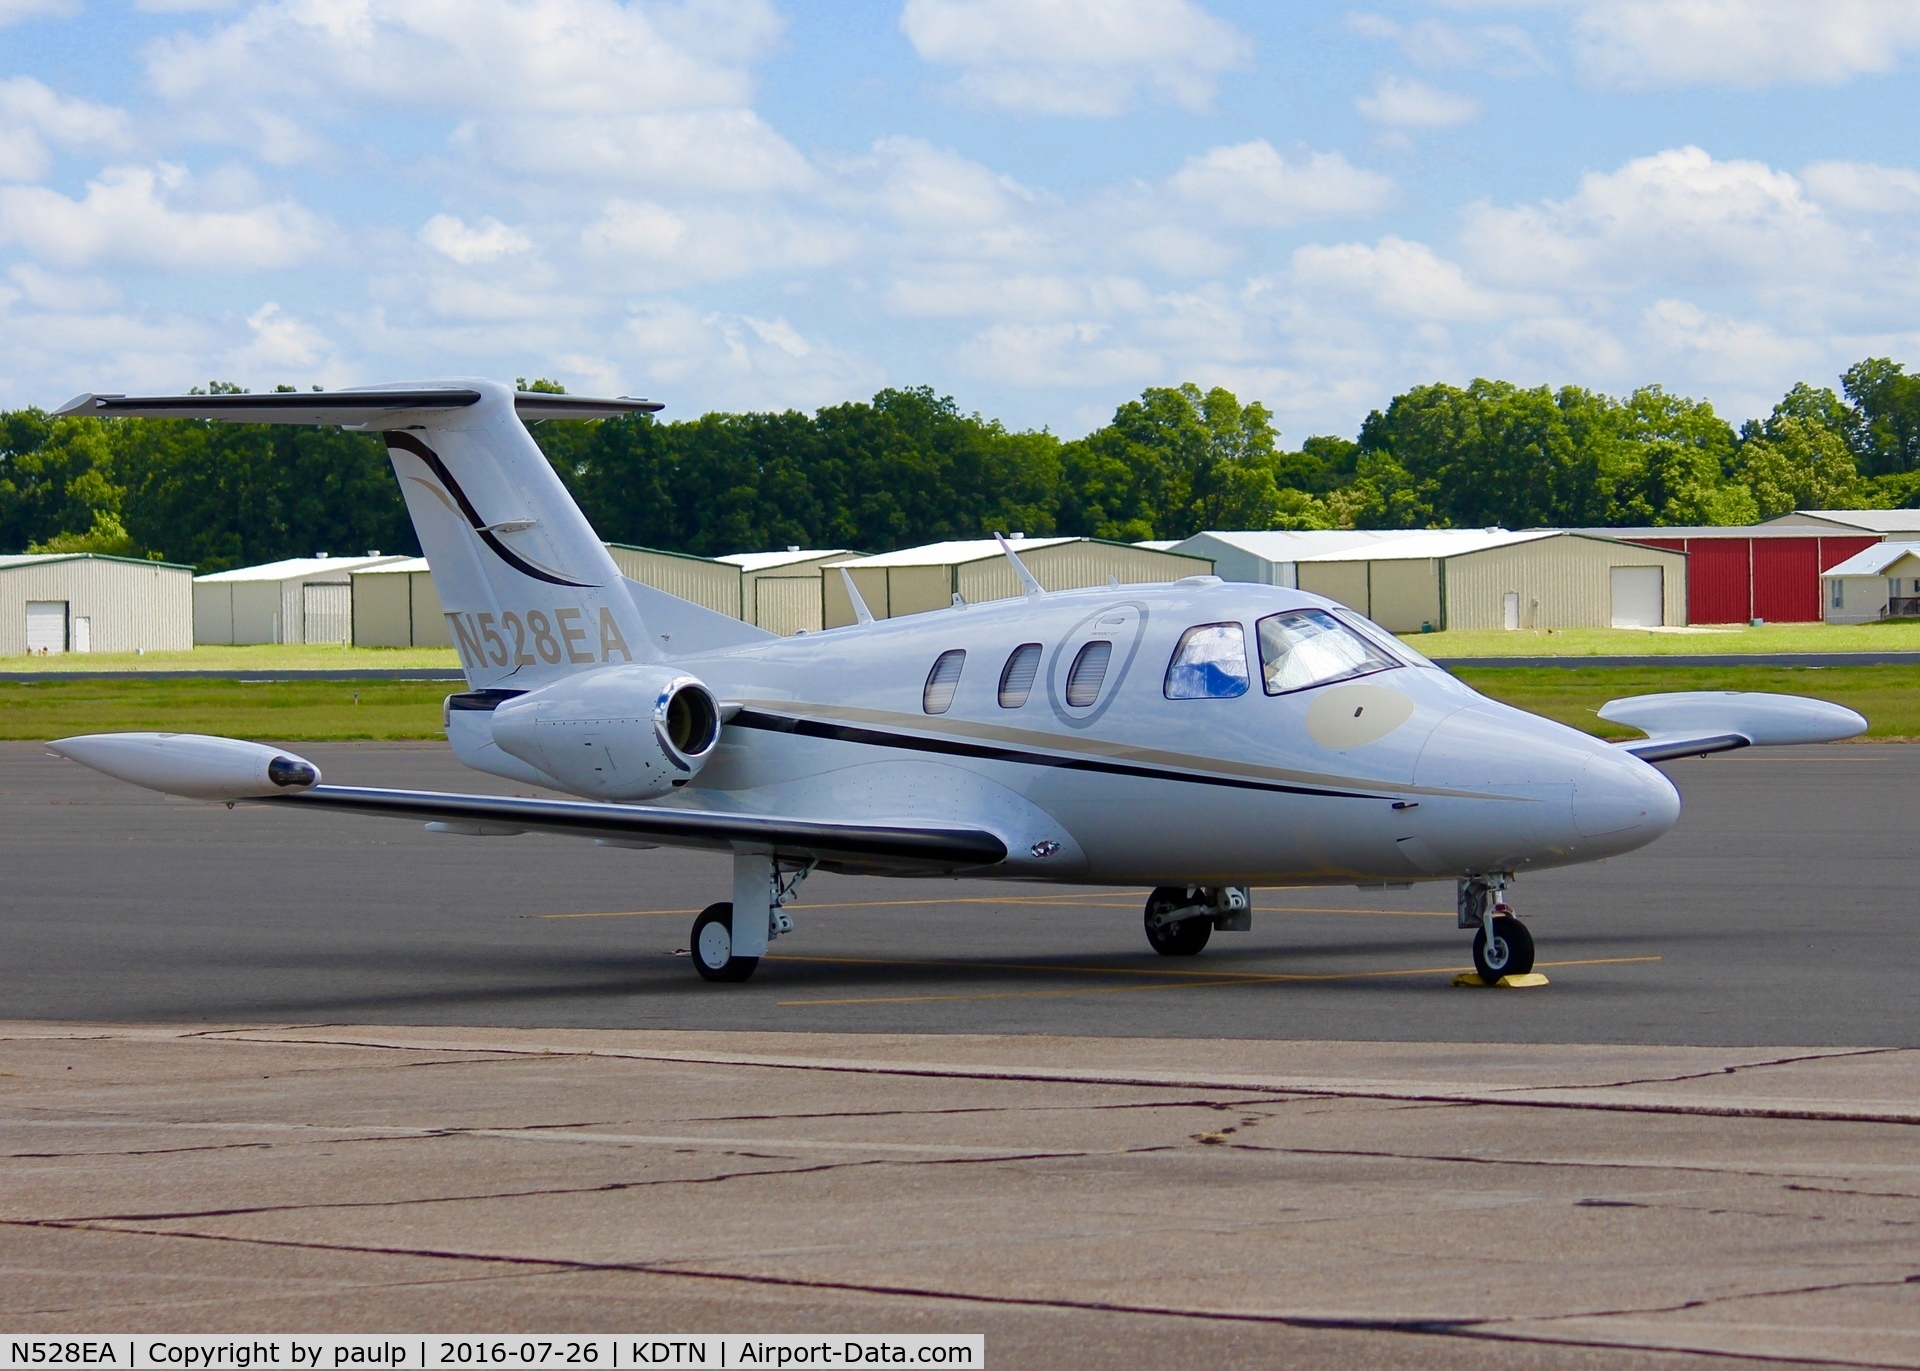 N528EA, 2008 Eclipse Aviation Corp EA500 C/N 000128, At Downtown Shreveport.